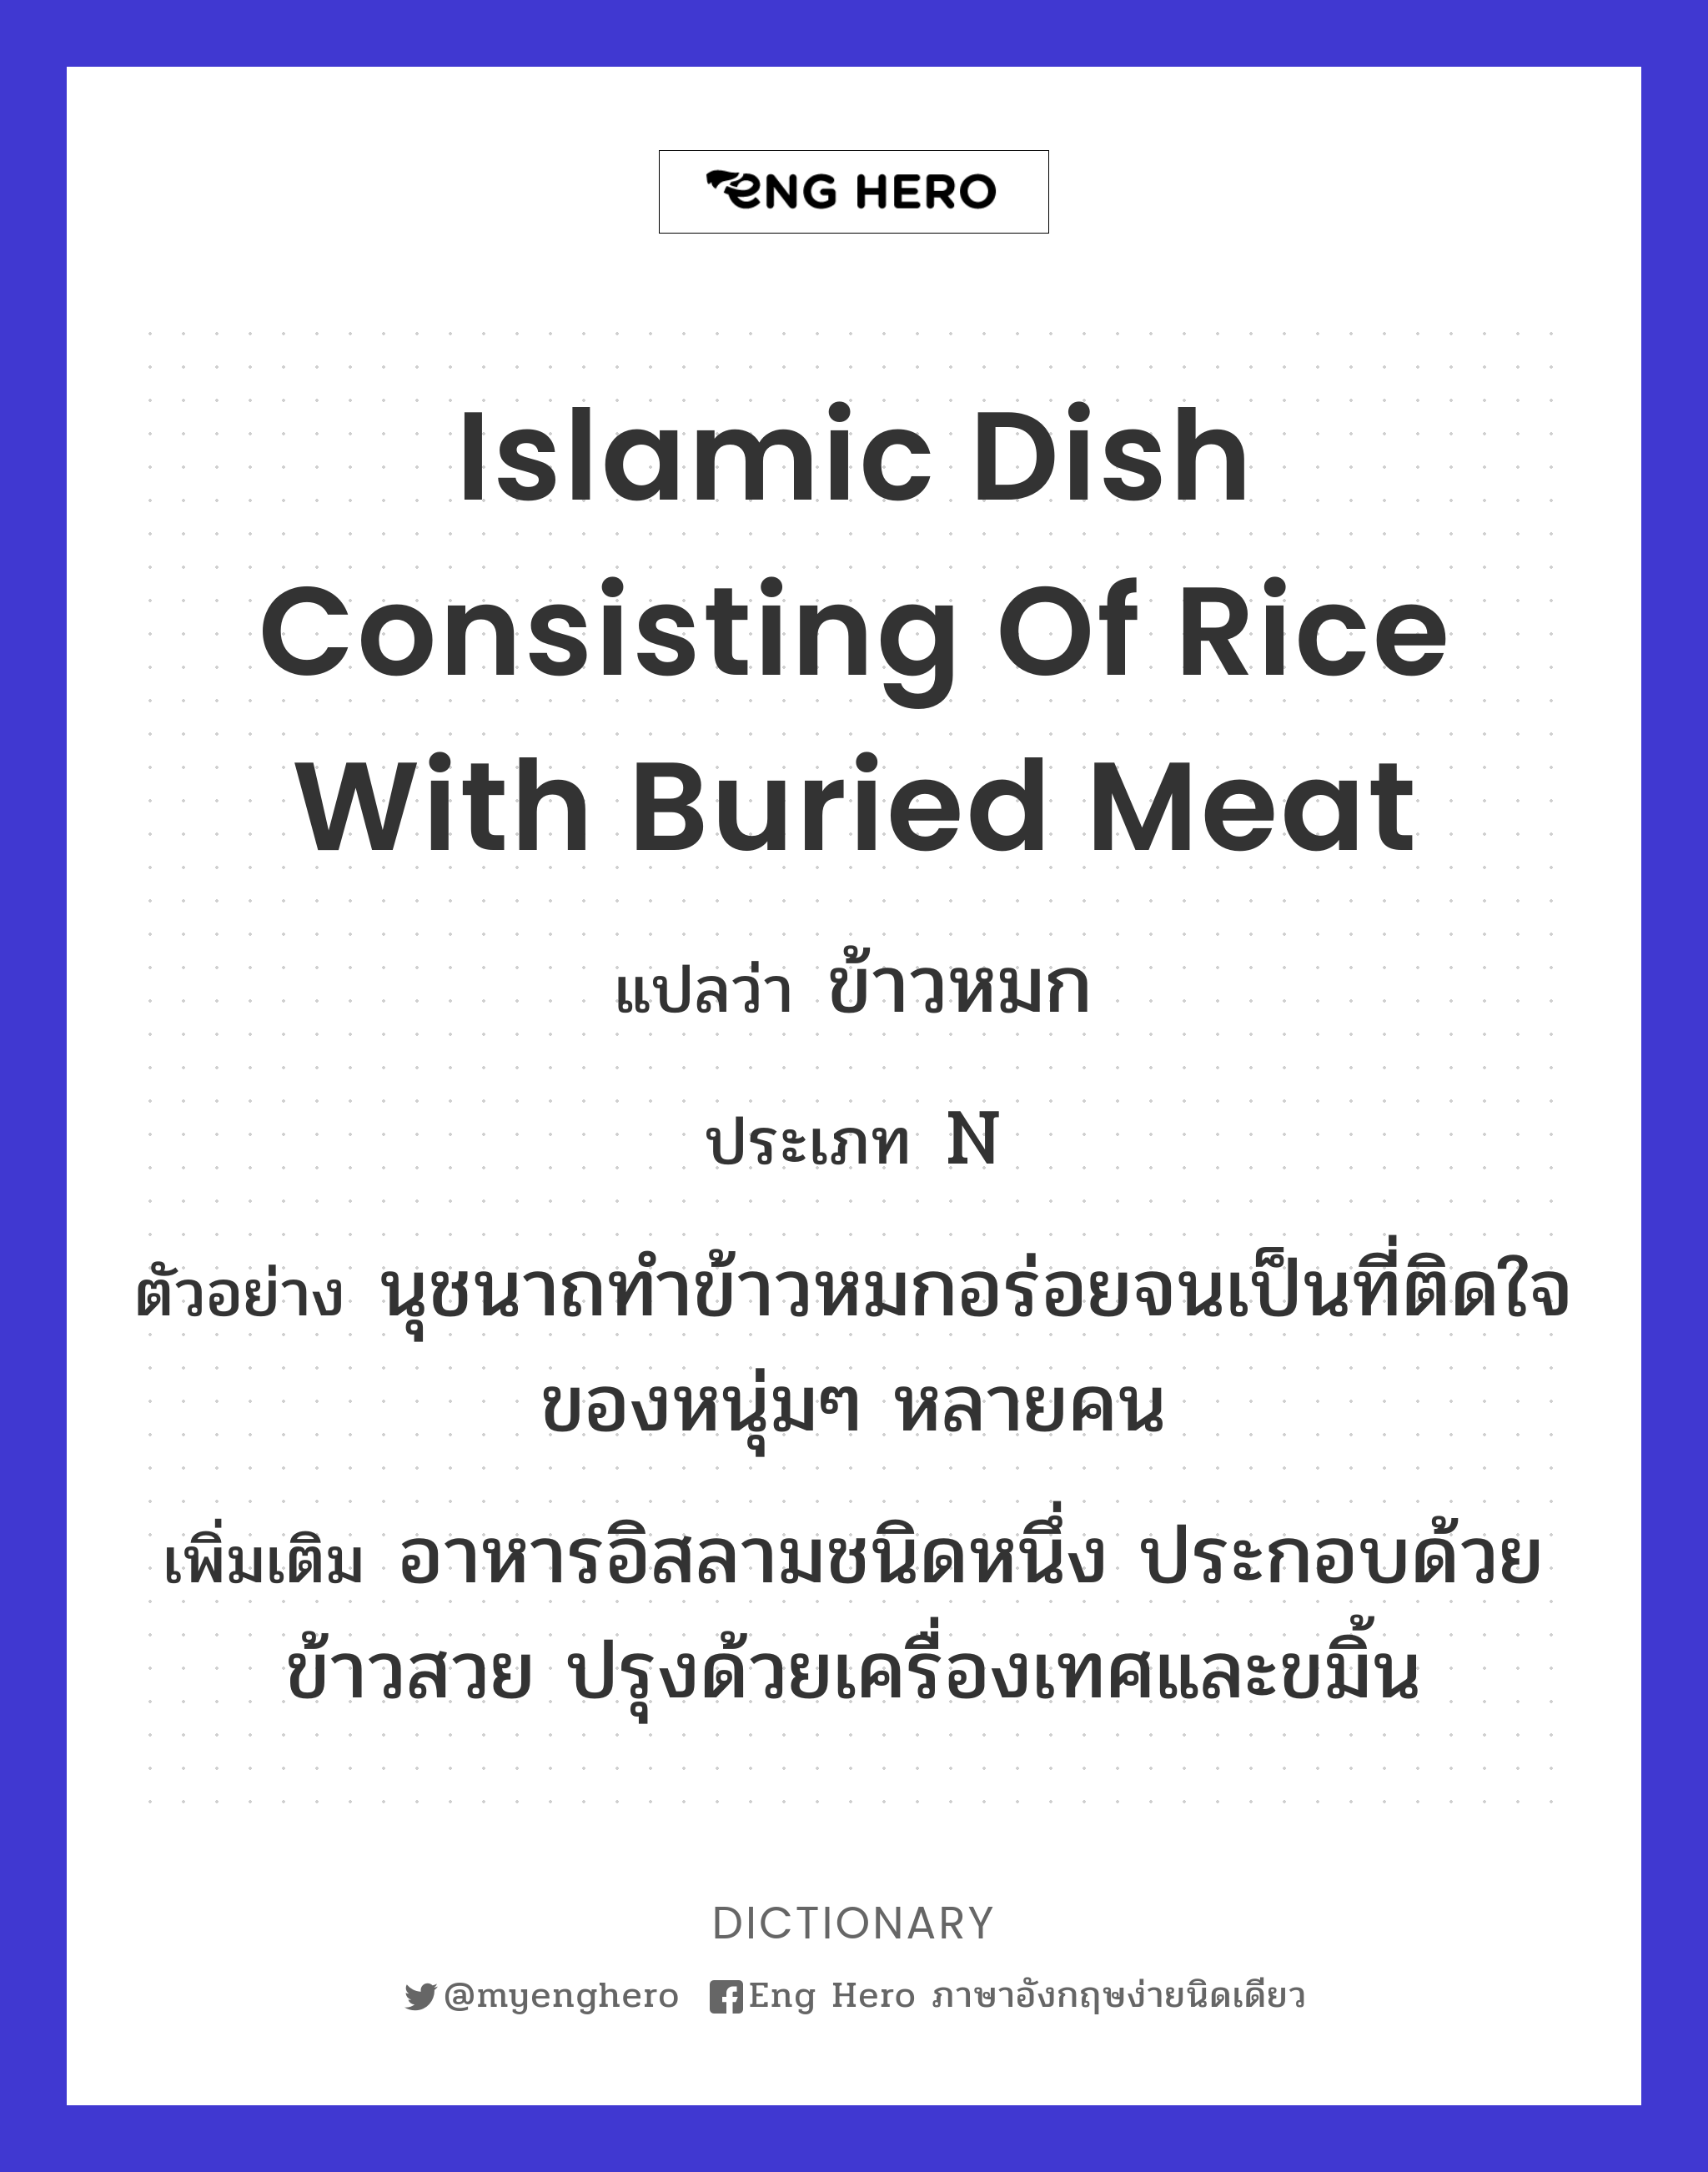 Islamic dish consisting of rice with buried meat